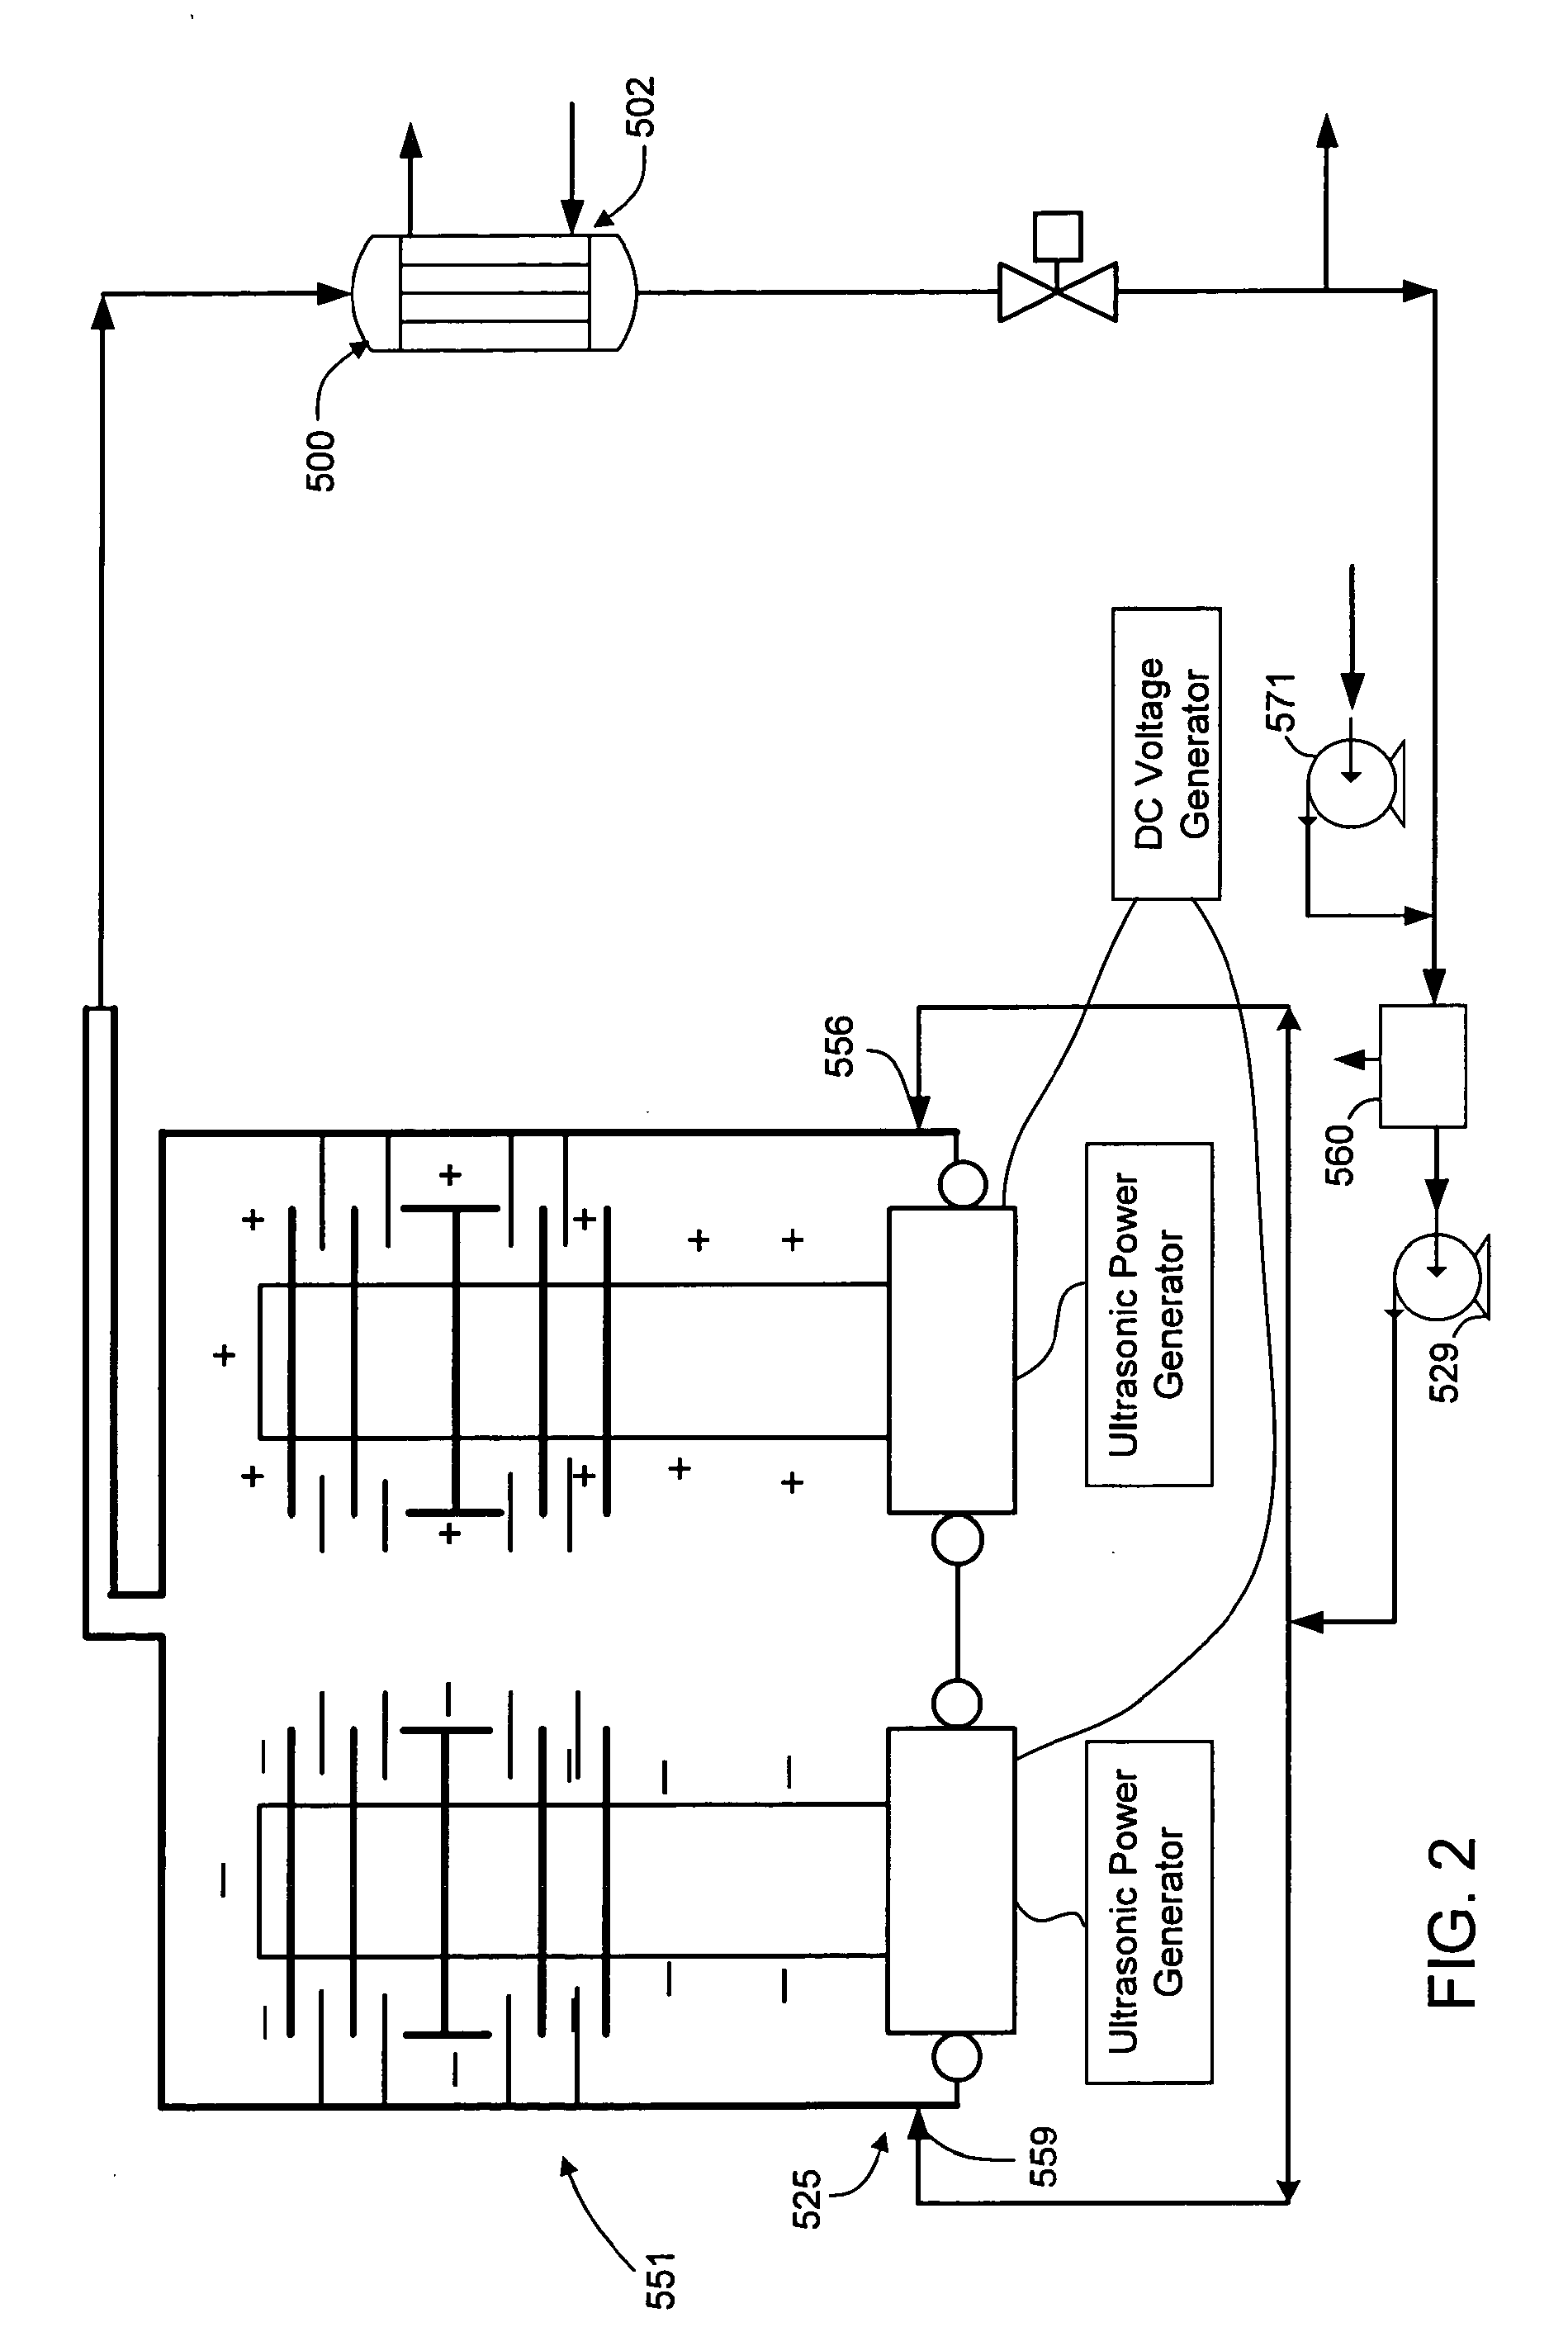 Ultrasonic treatment chamber for treating hydrogen isotopes